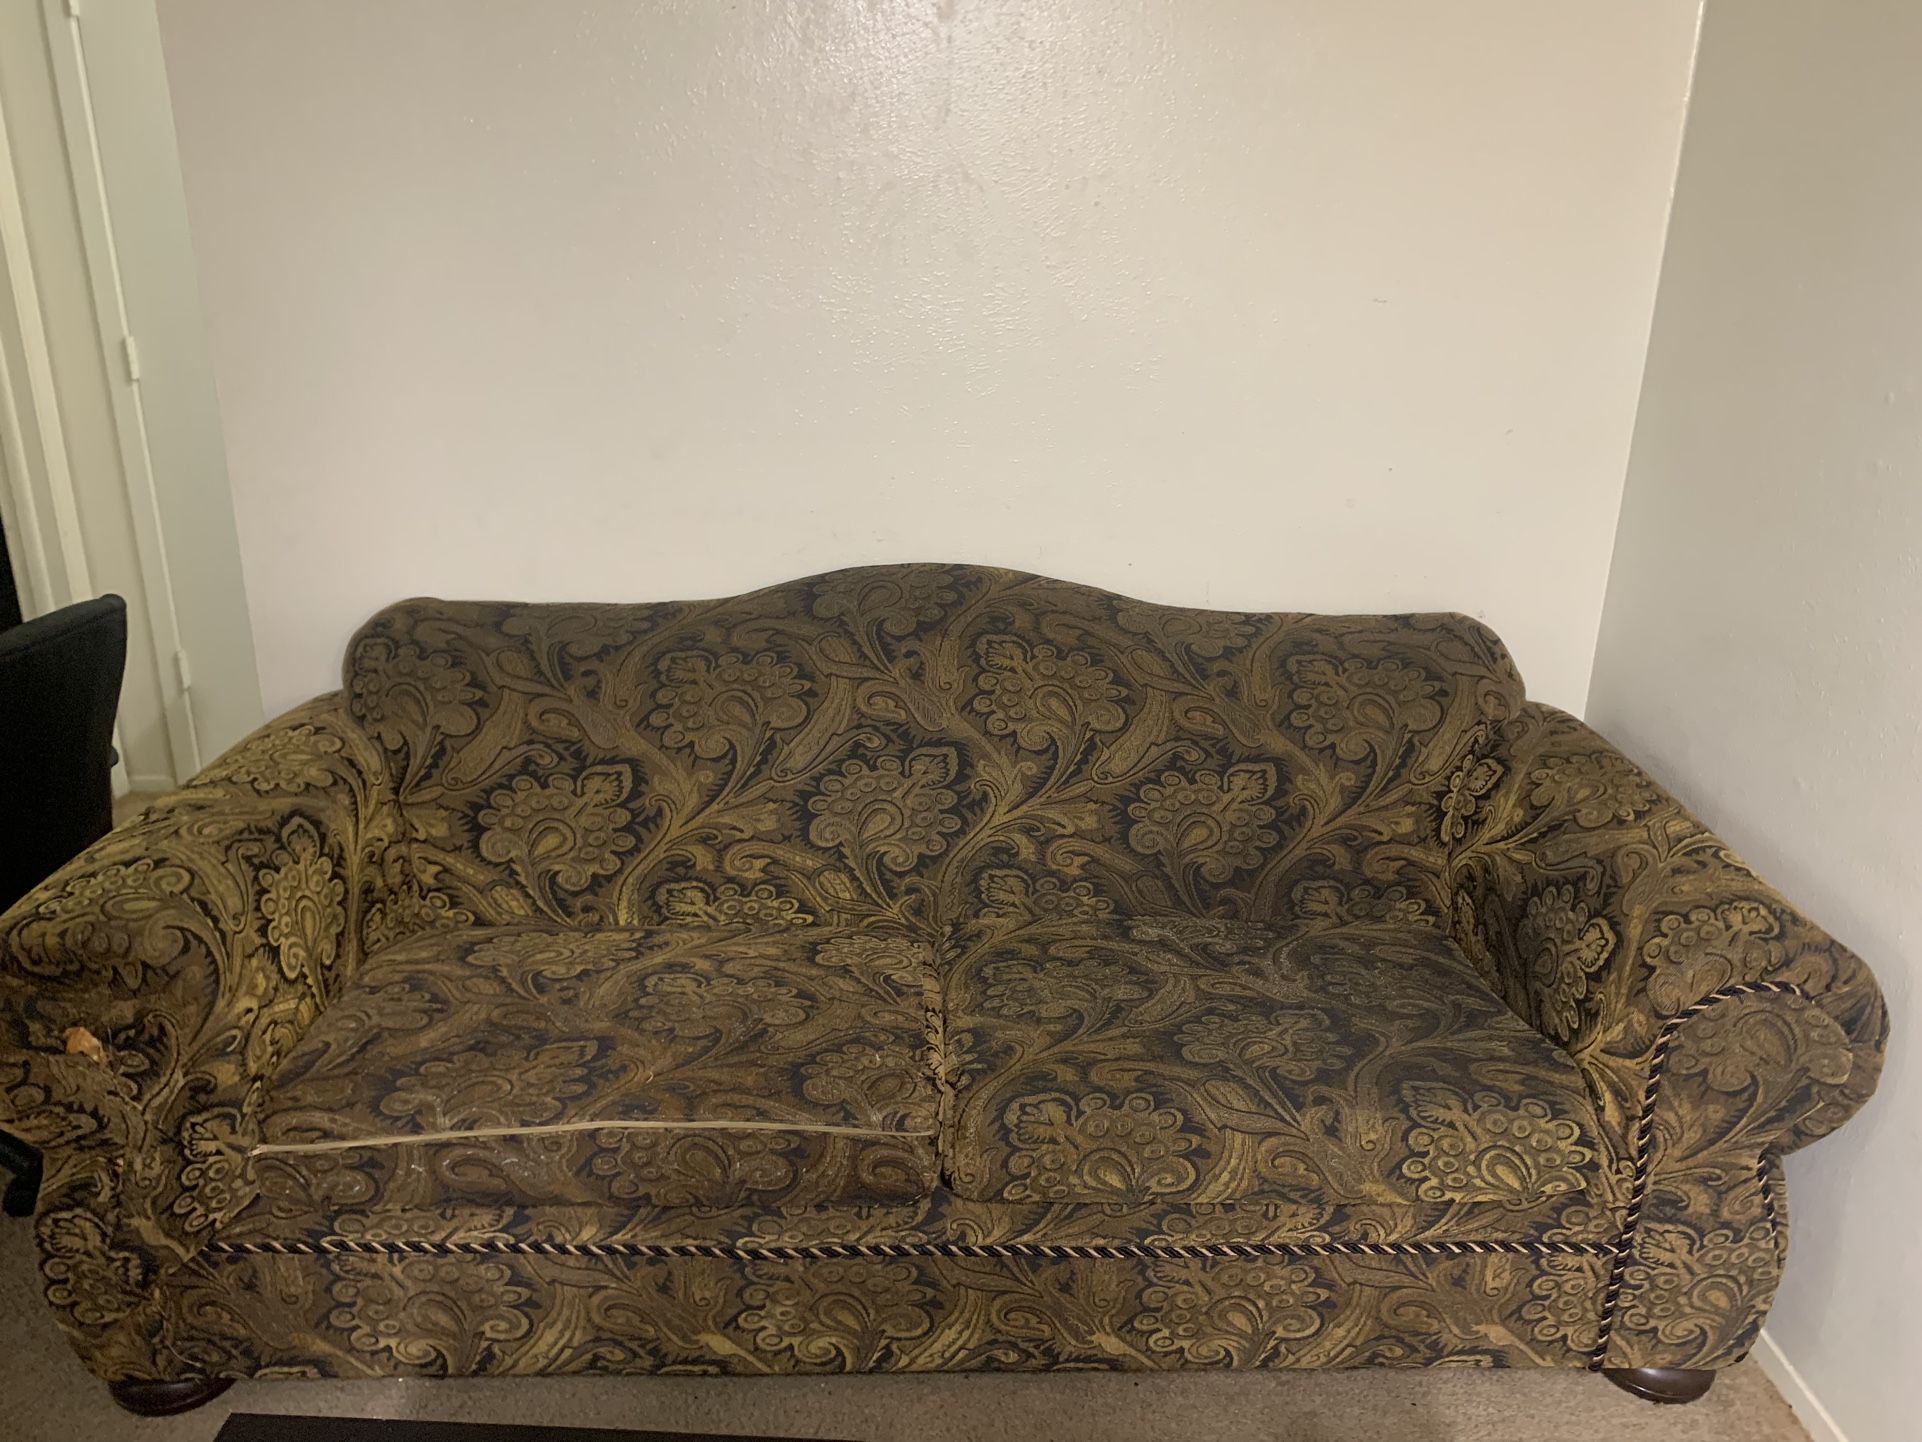 2 Couches + A Table For Free